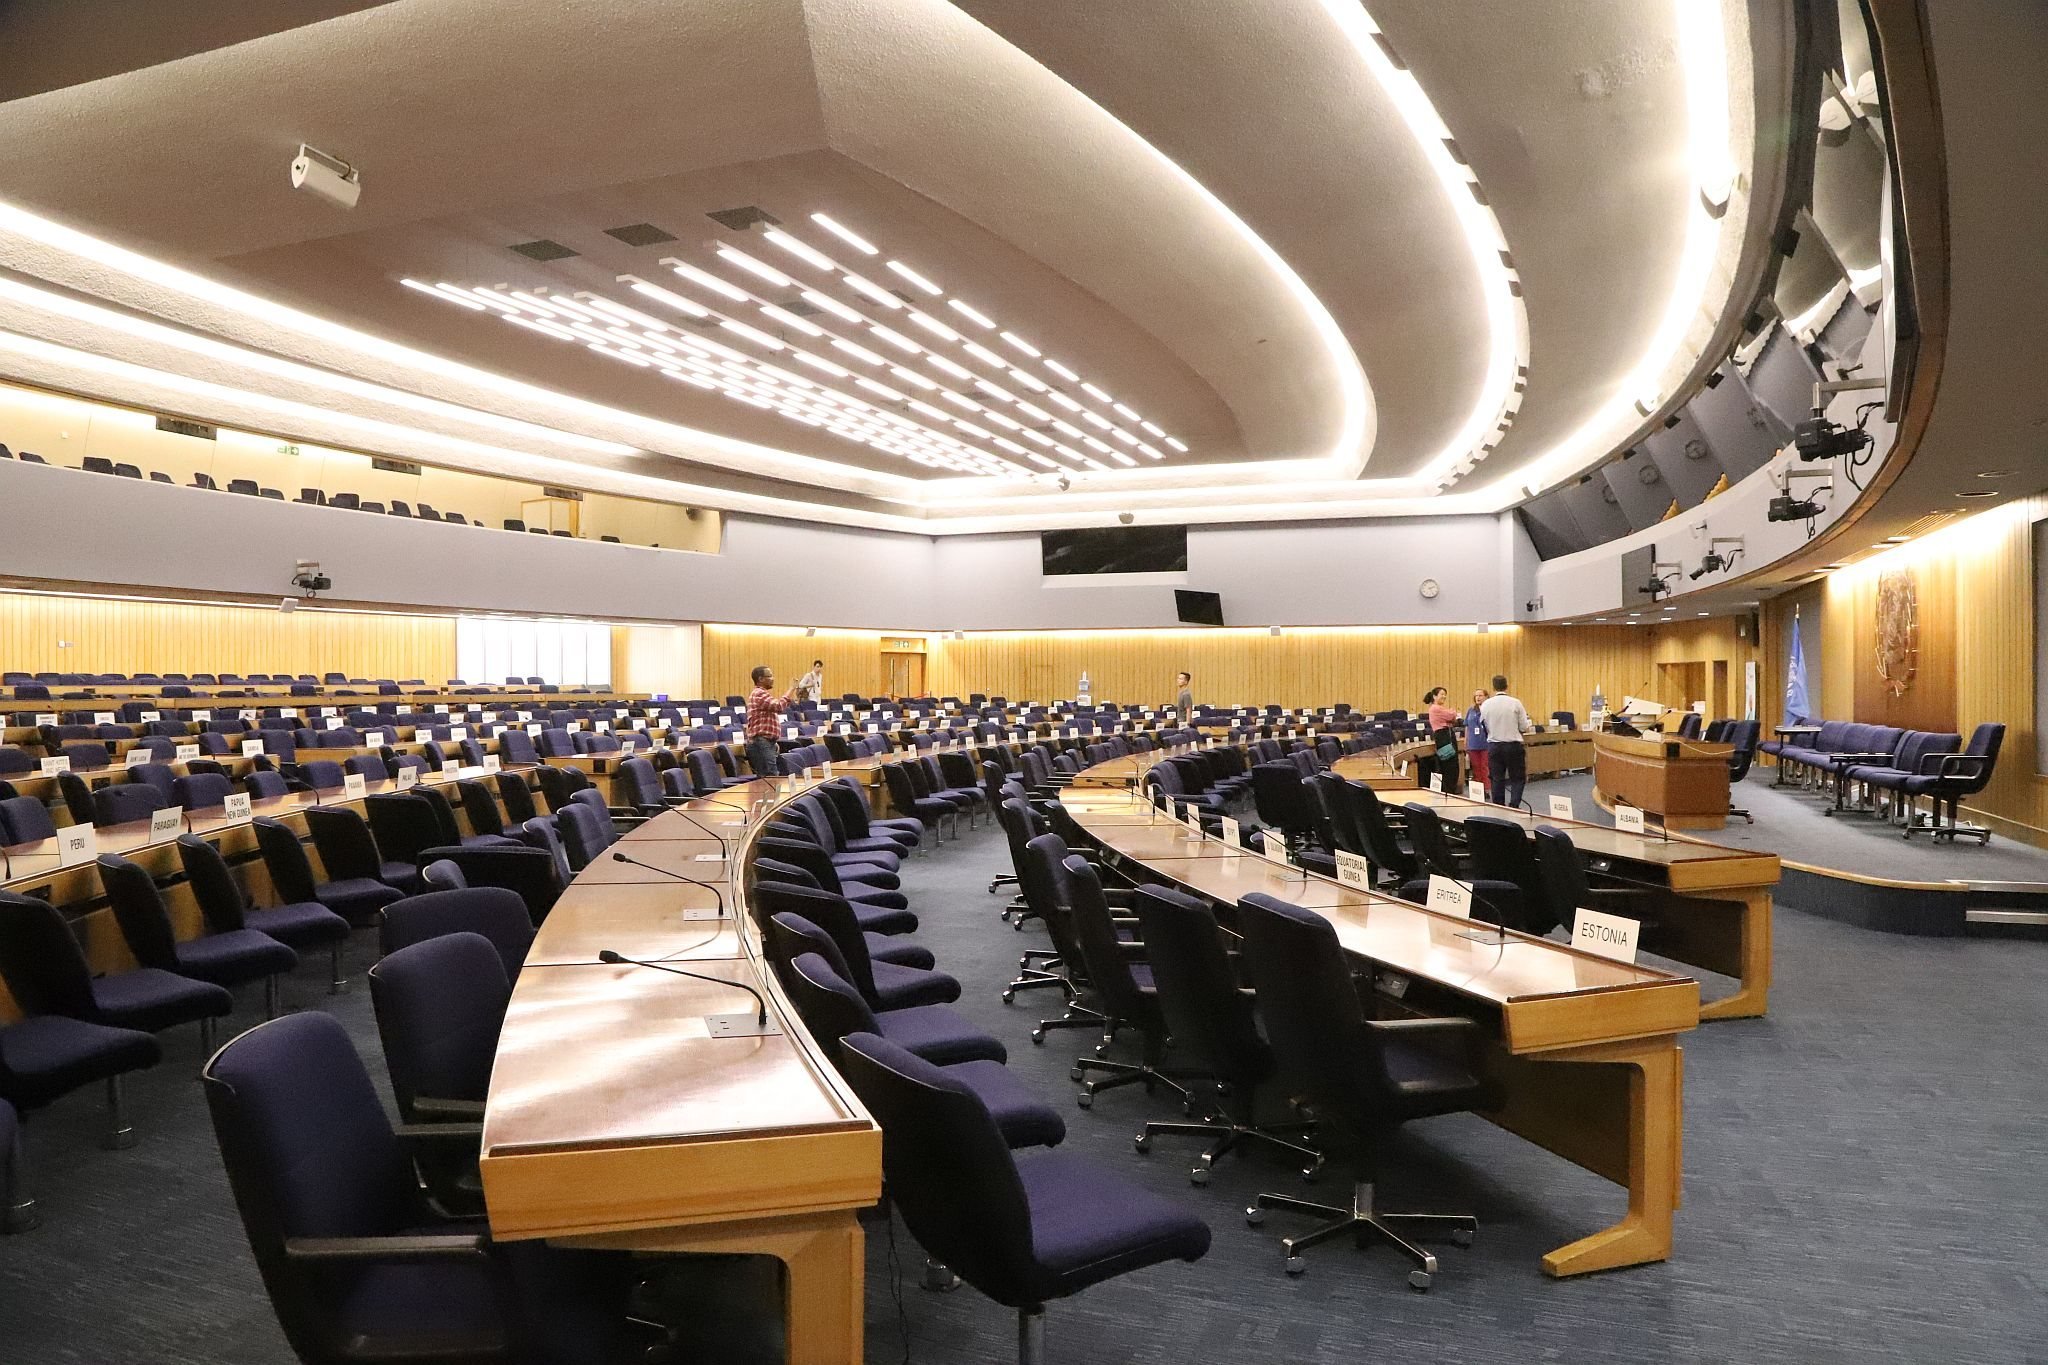 IMO Assembly room. The International Maritime Organization - IMO - in Lambeth, London. Photo taken 10-Sep-2023 during London Open House Weekend.